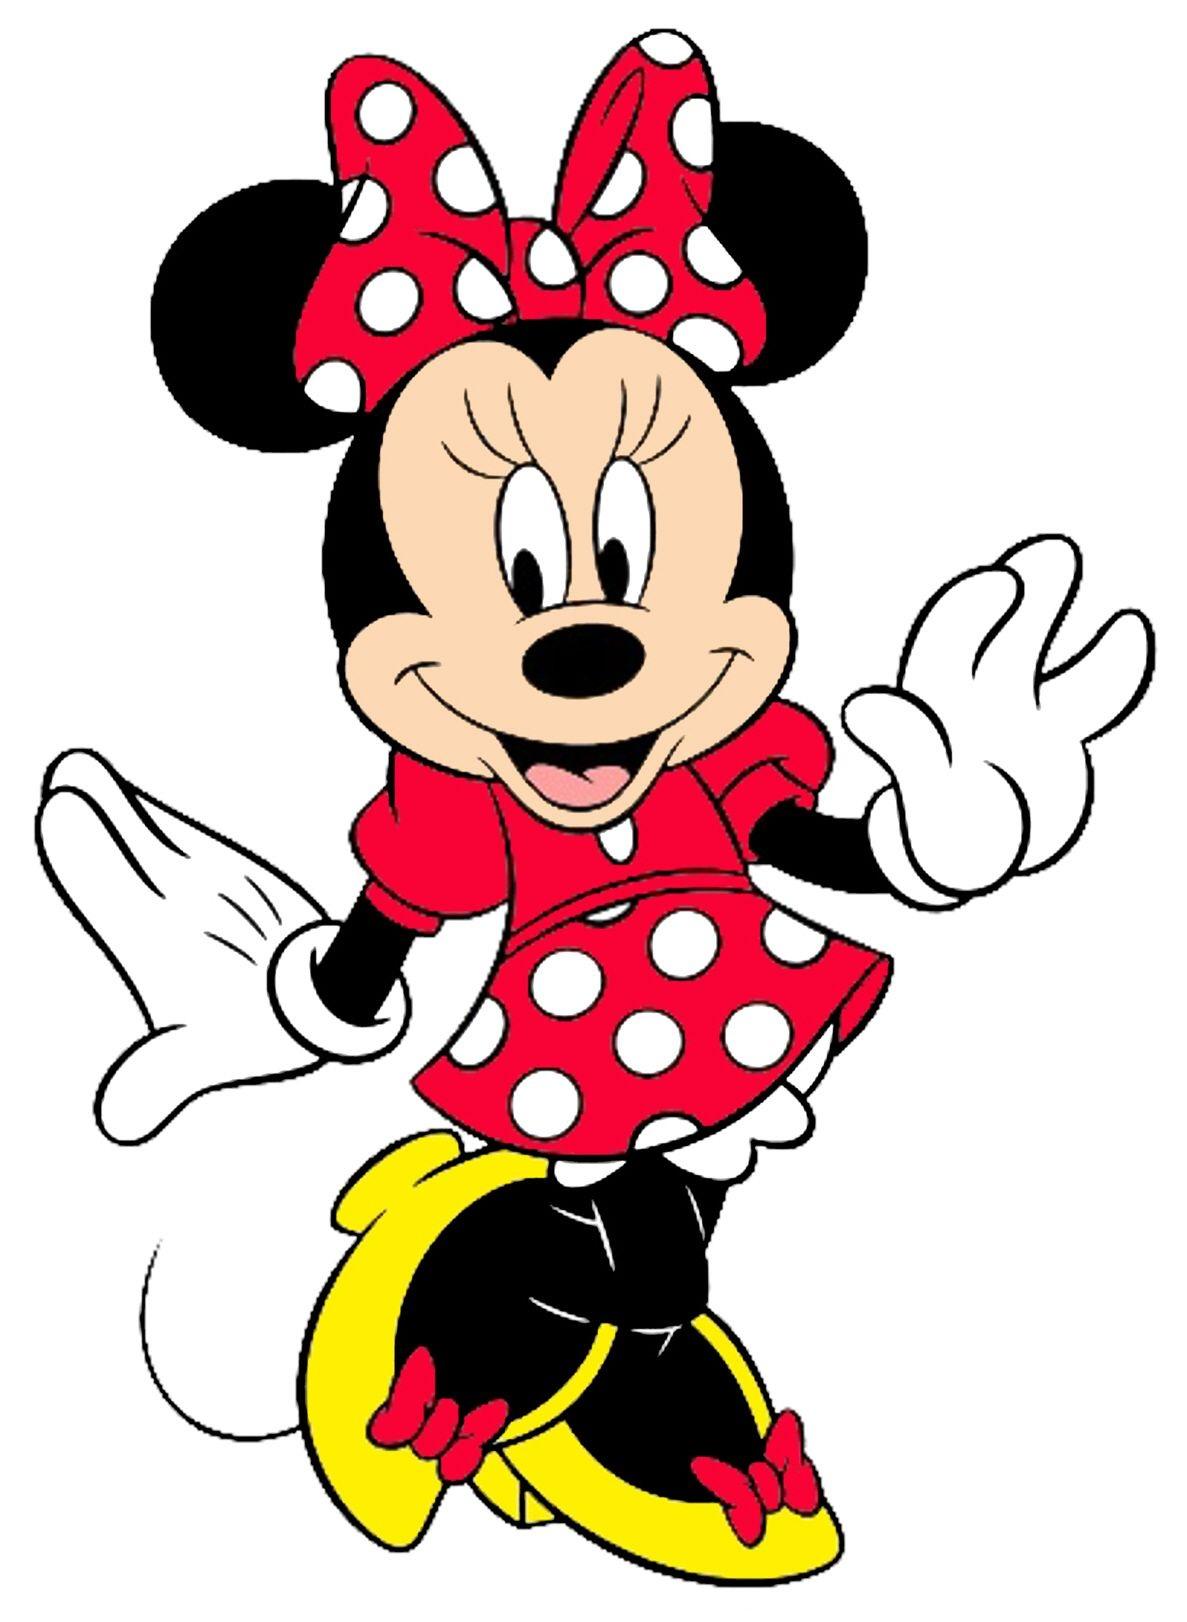 Bing Images - http://www.bing.com:80/images/search?q=minnie+mouse+ ...